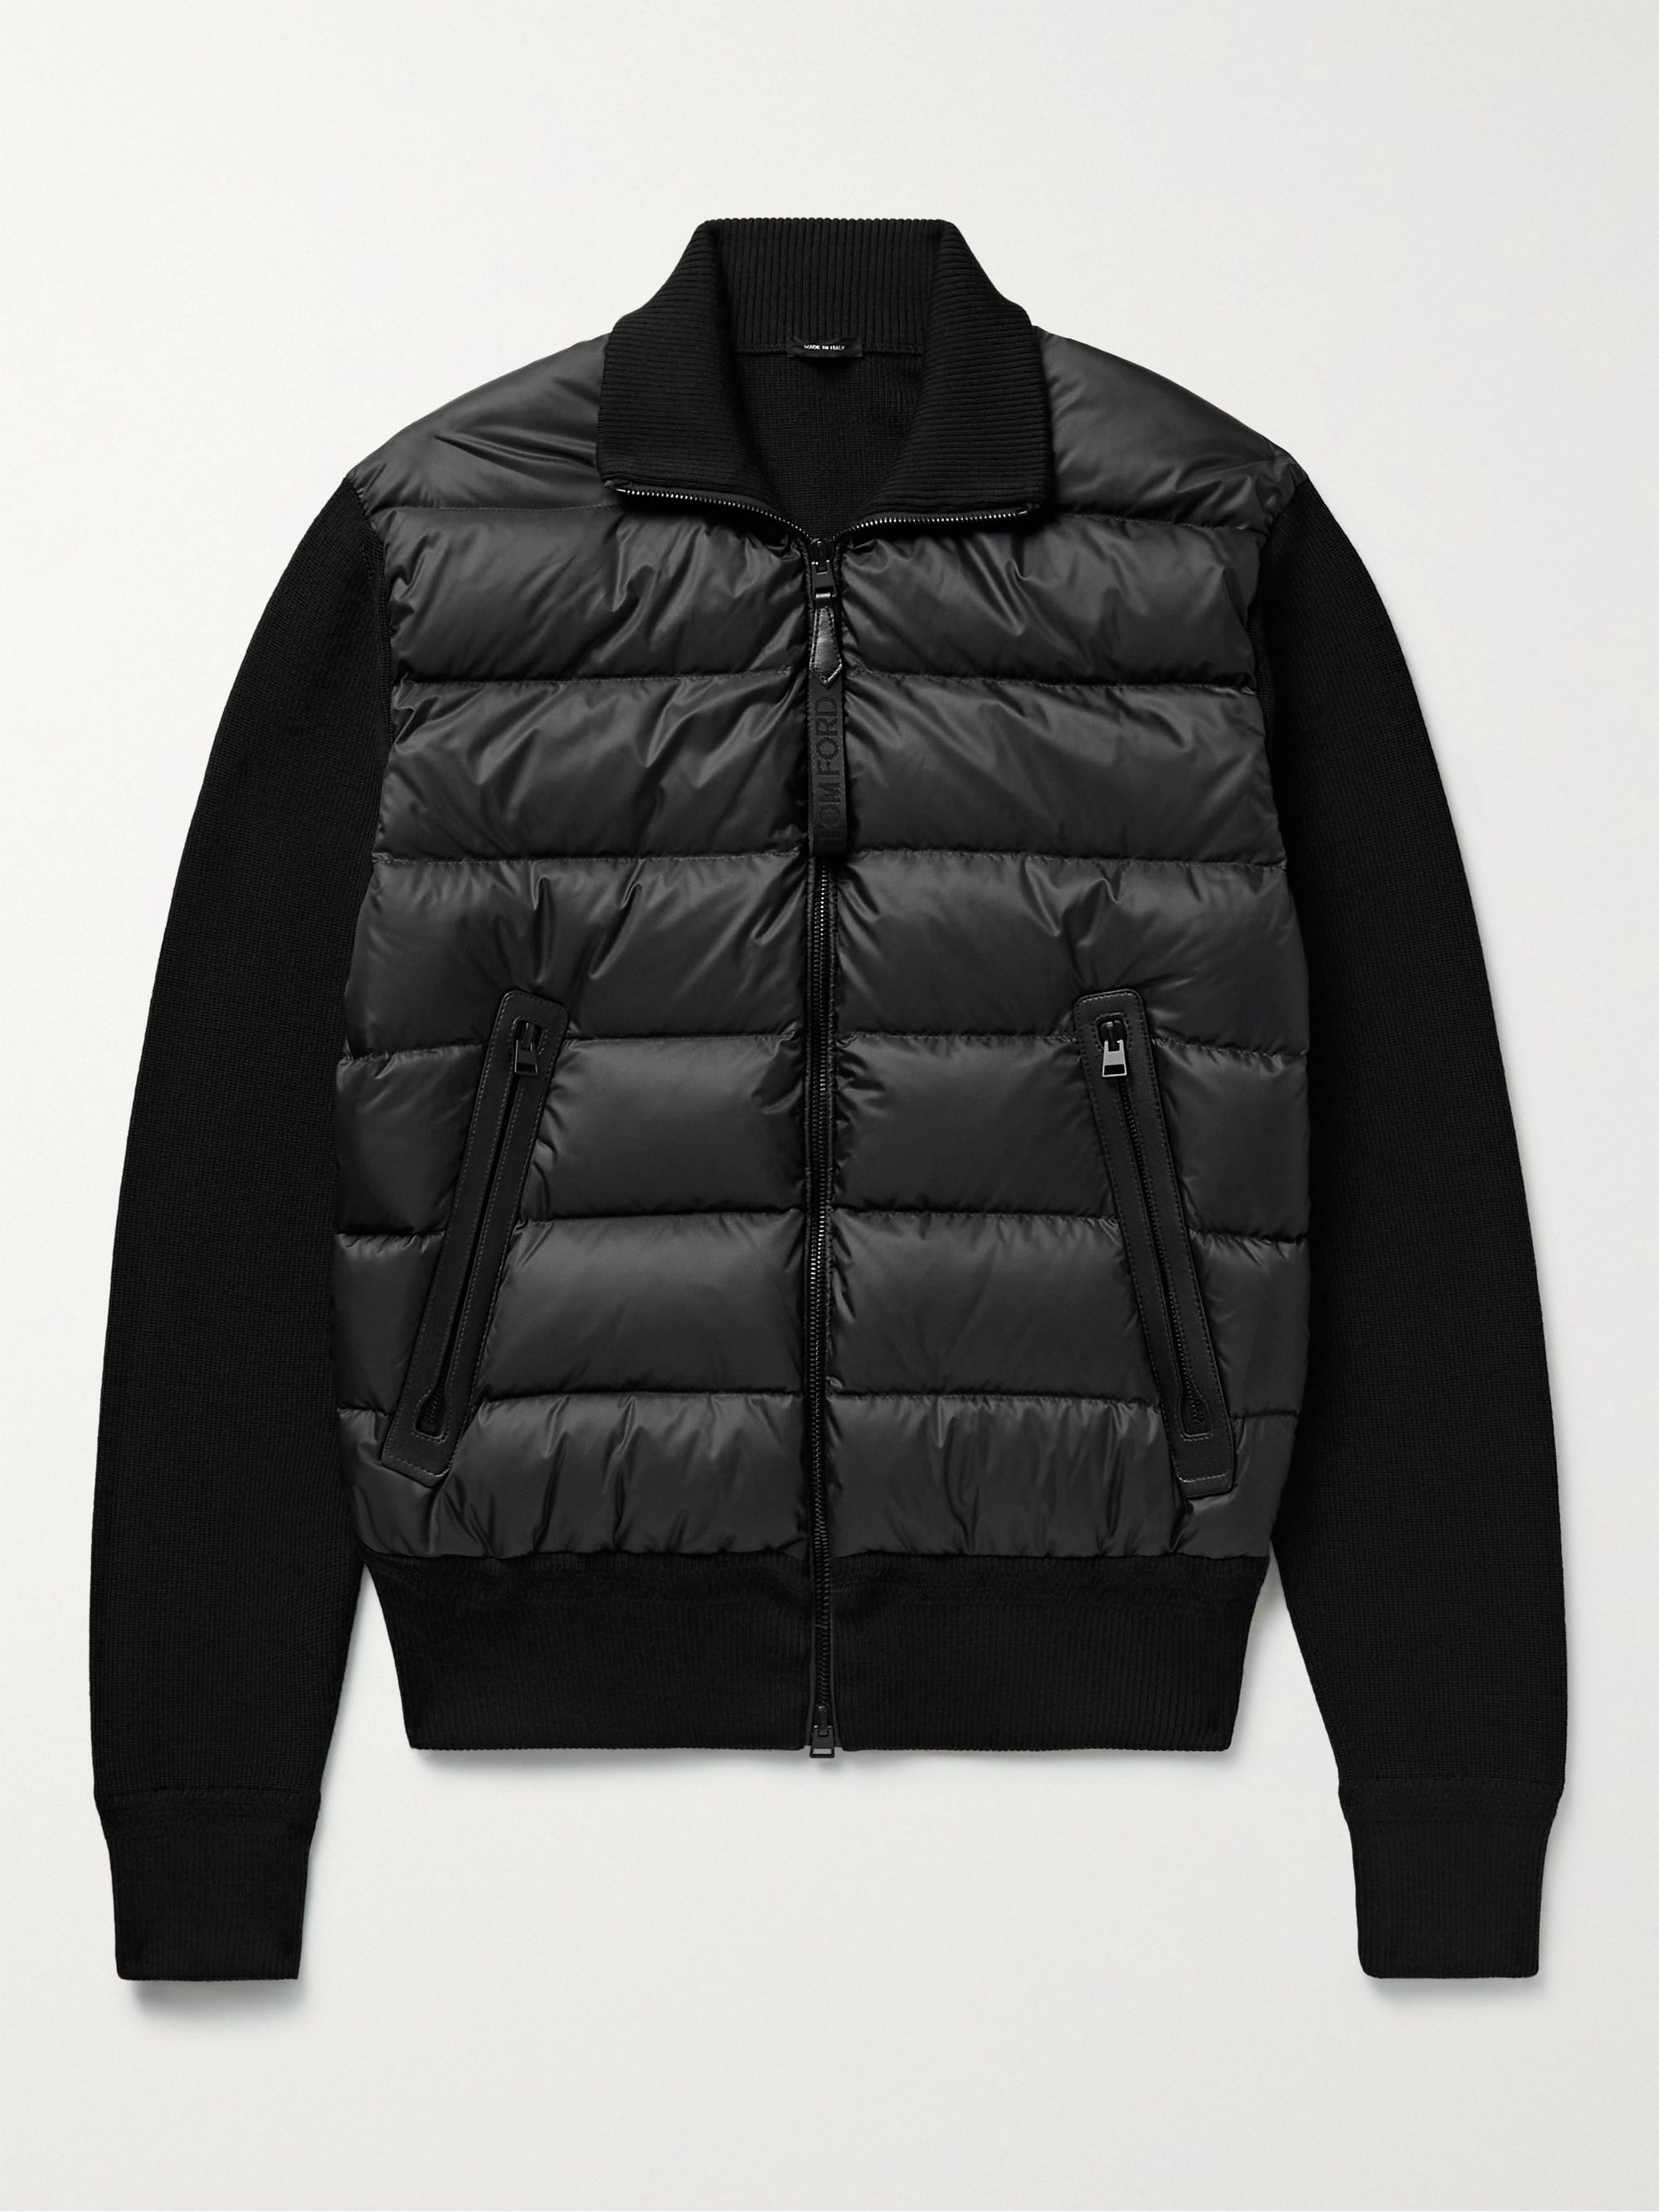 tom ford puffer jacket,Quality assurance,protein-burger.com